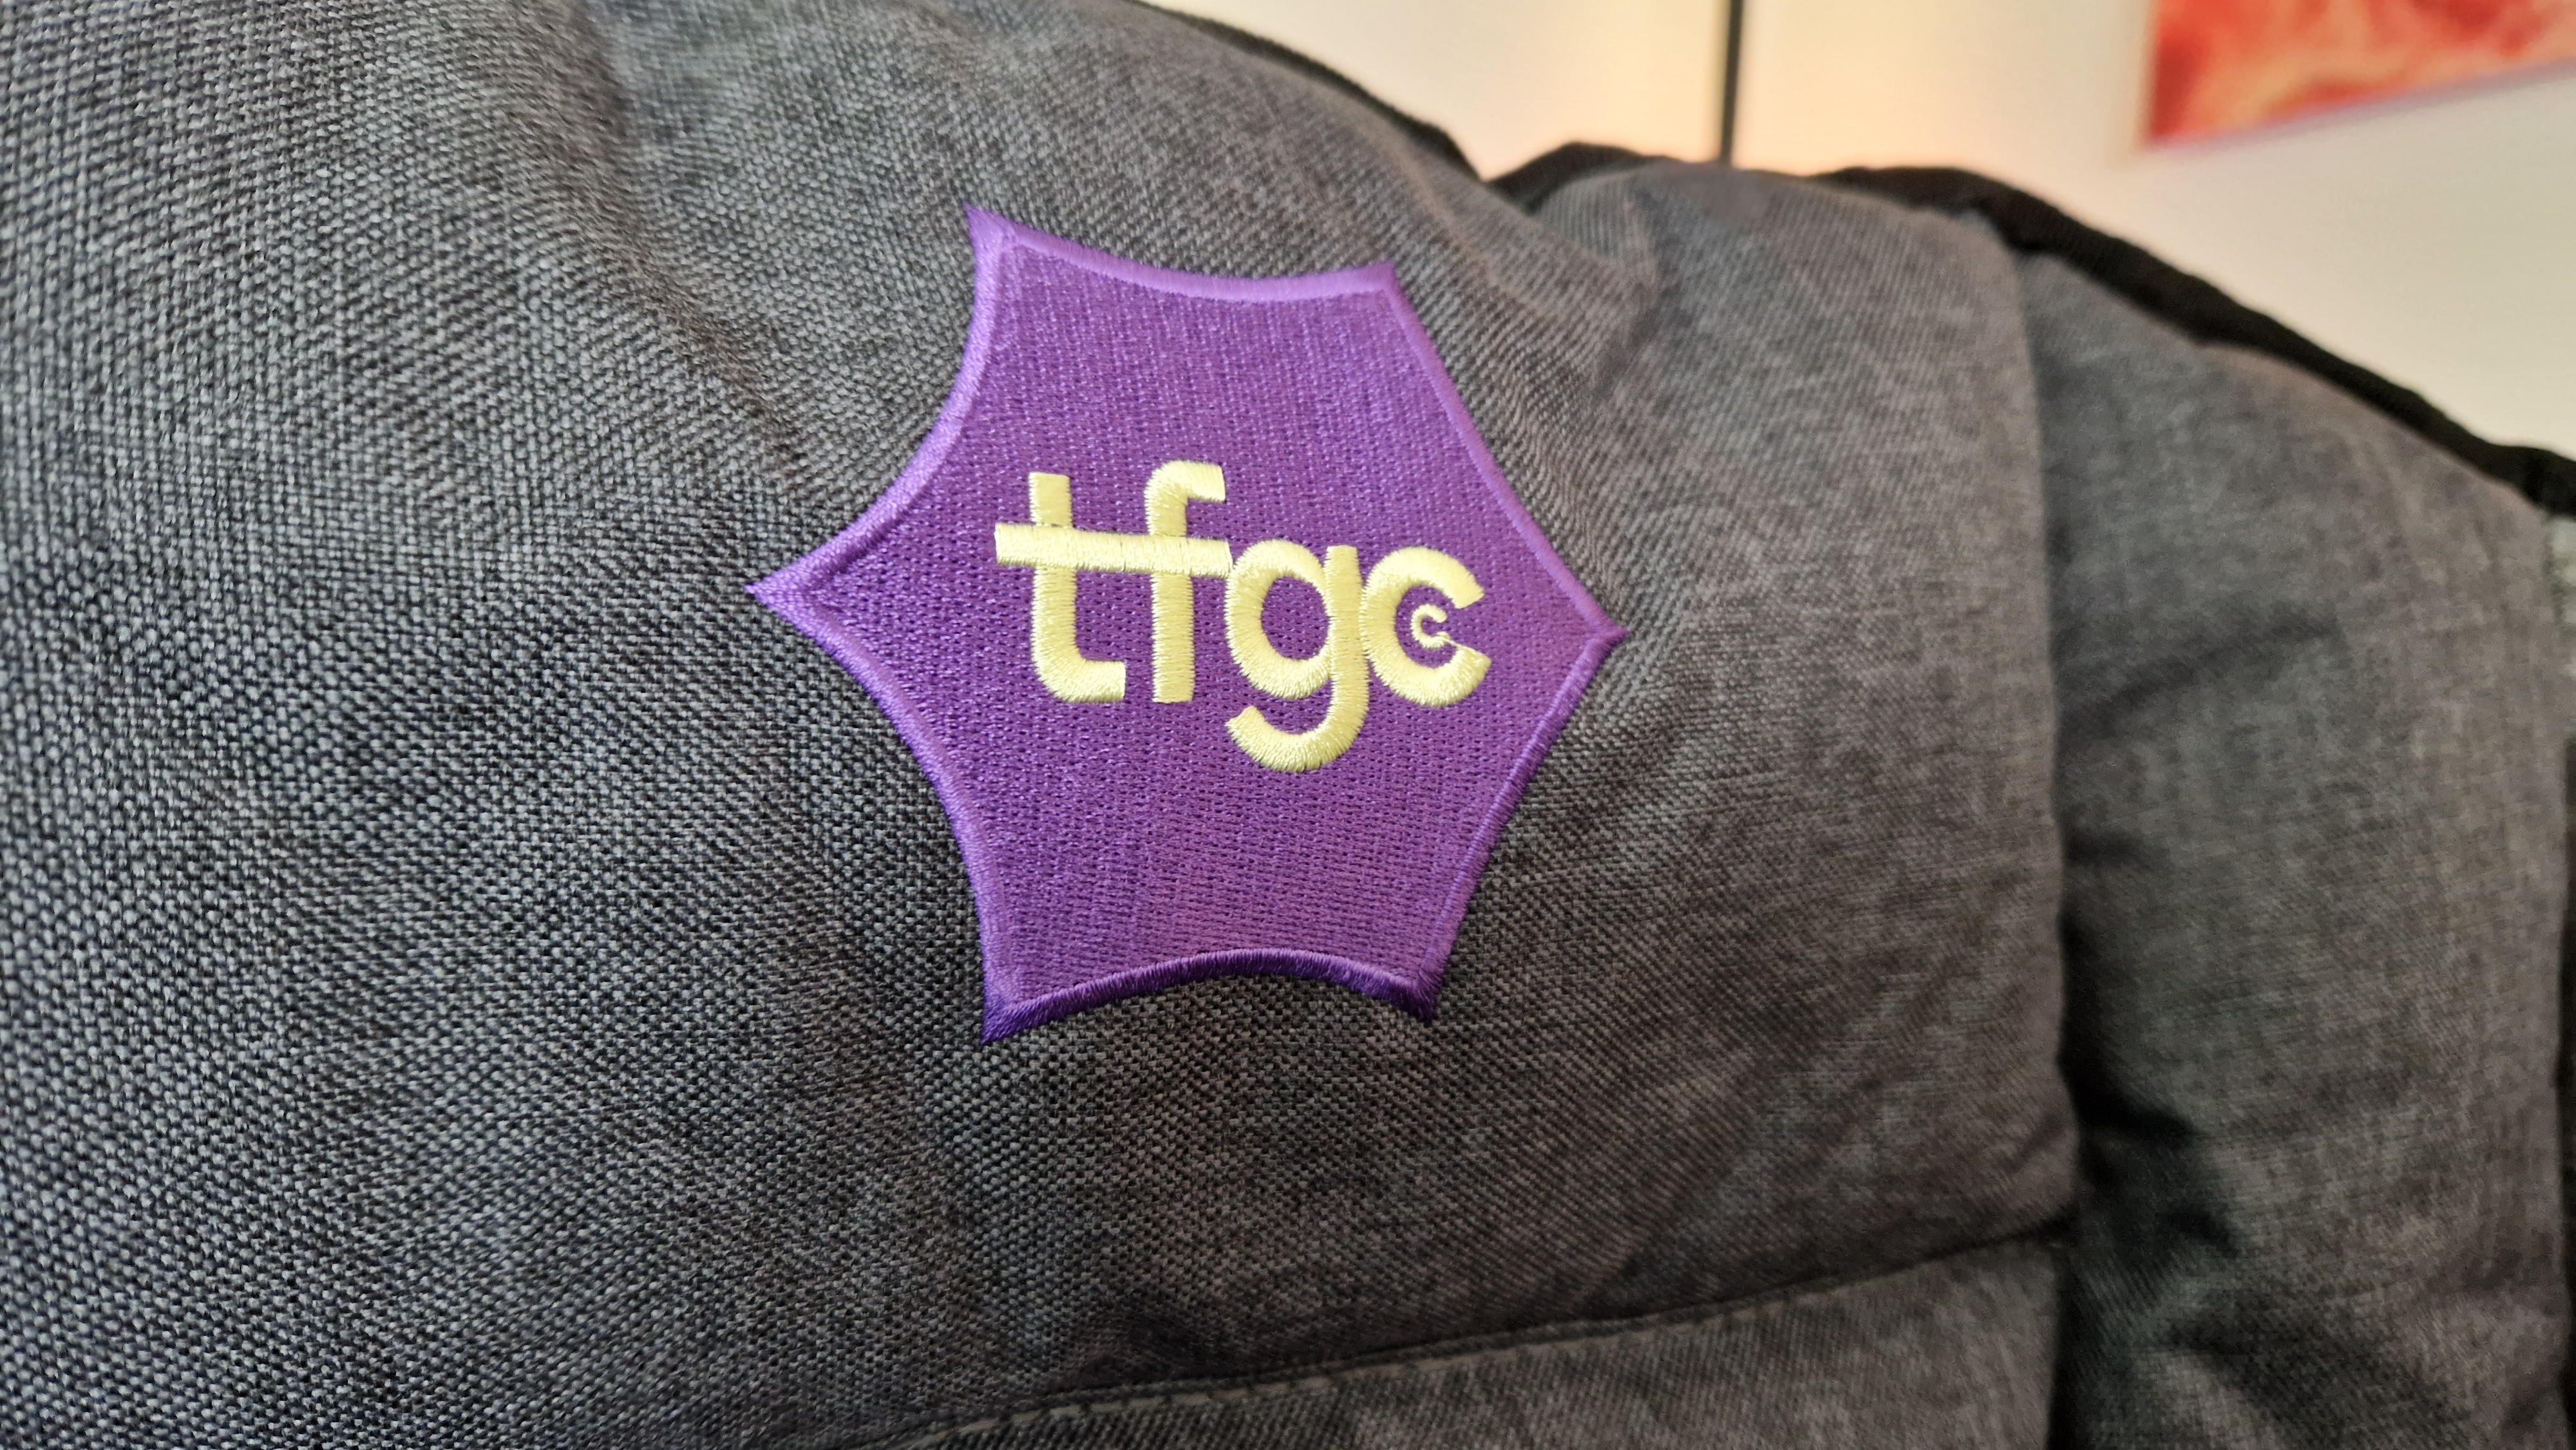 The Foldable Gaming Chair's logo on the front of the seat